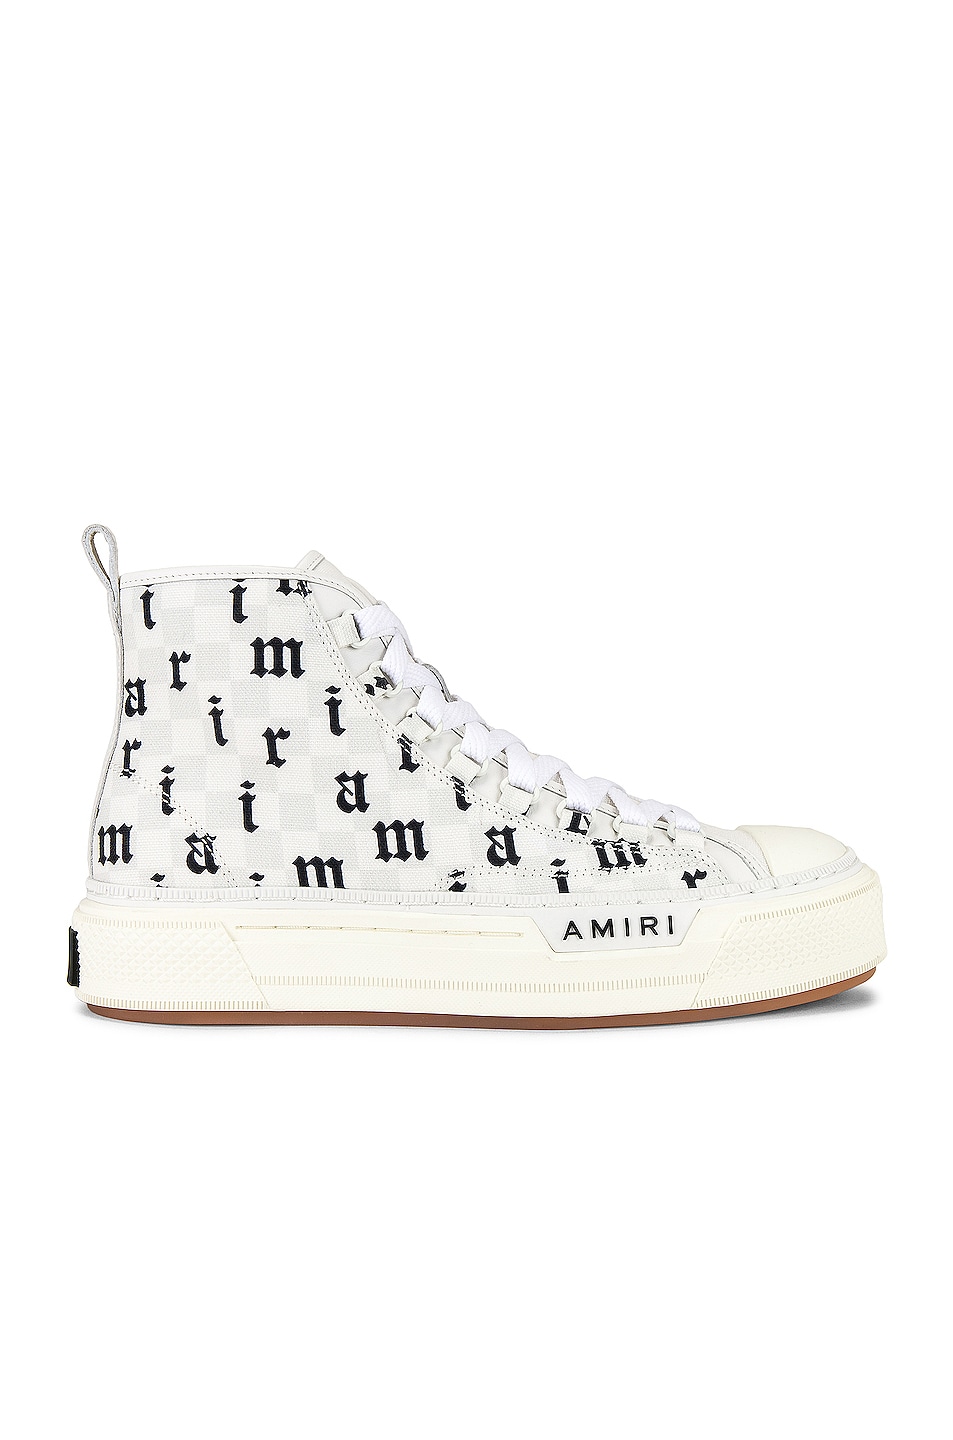 Image 1 of Amiri Old English Court High Top Sneaker in White & Black